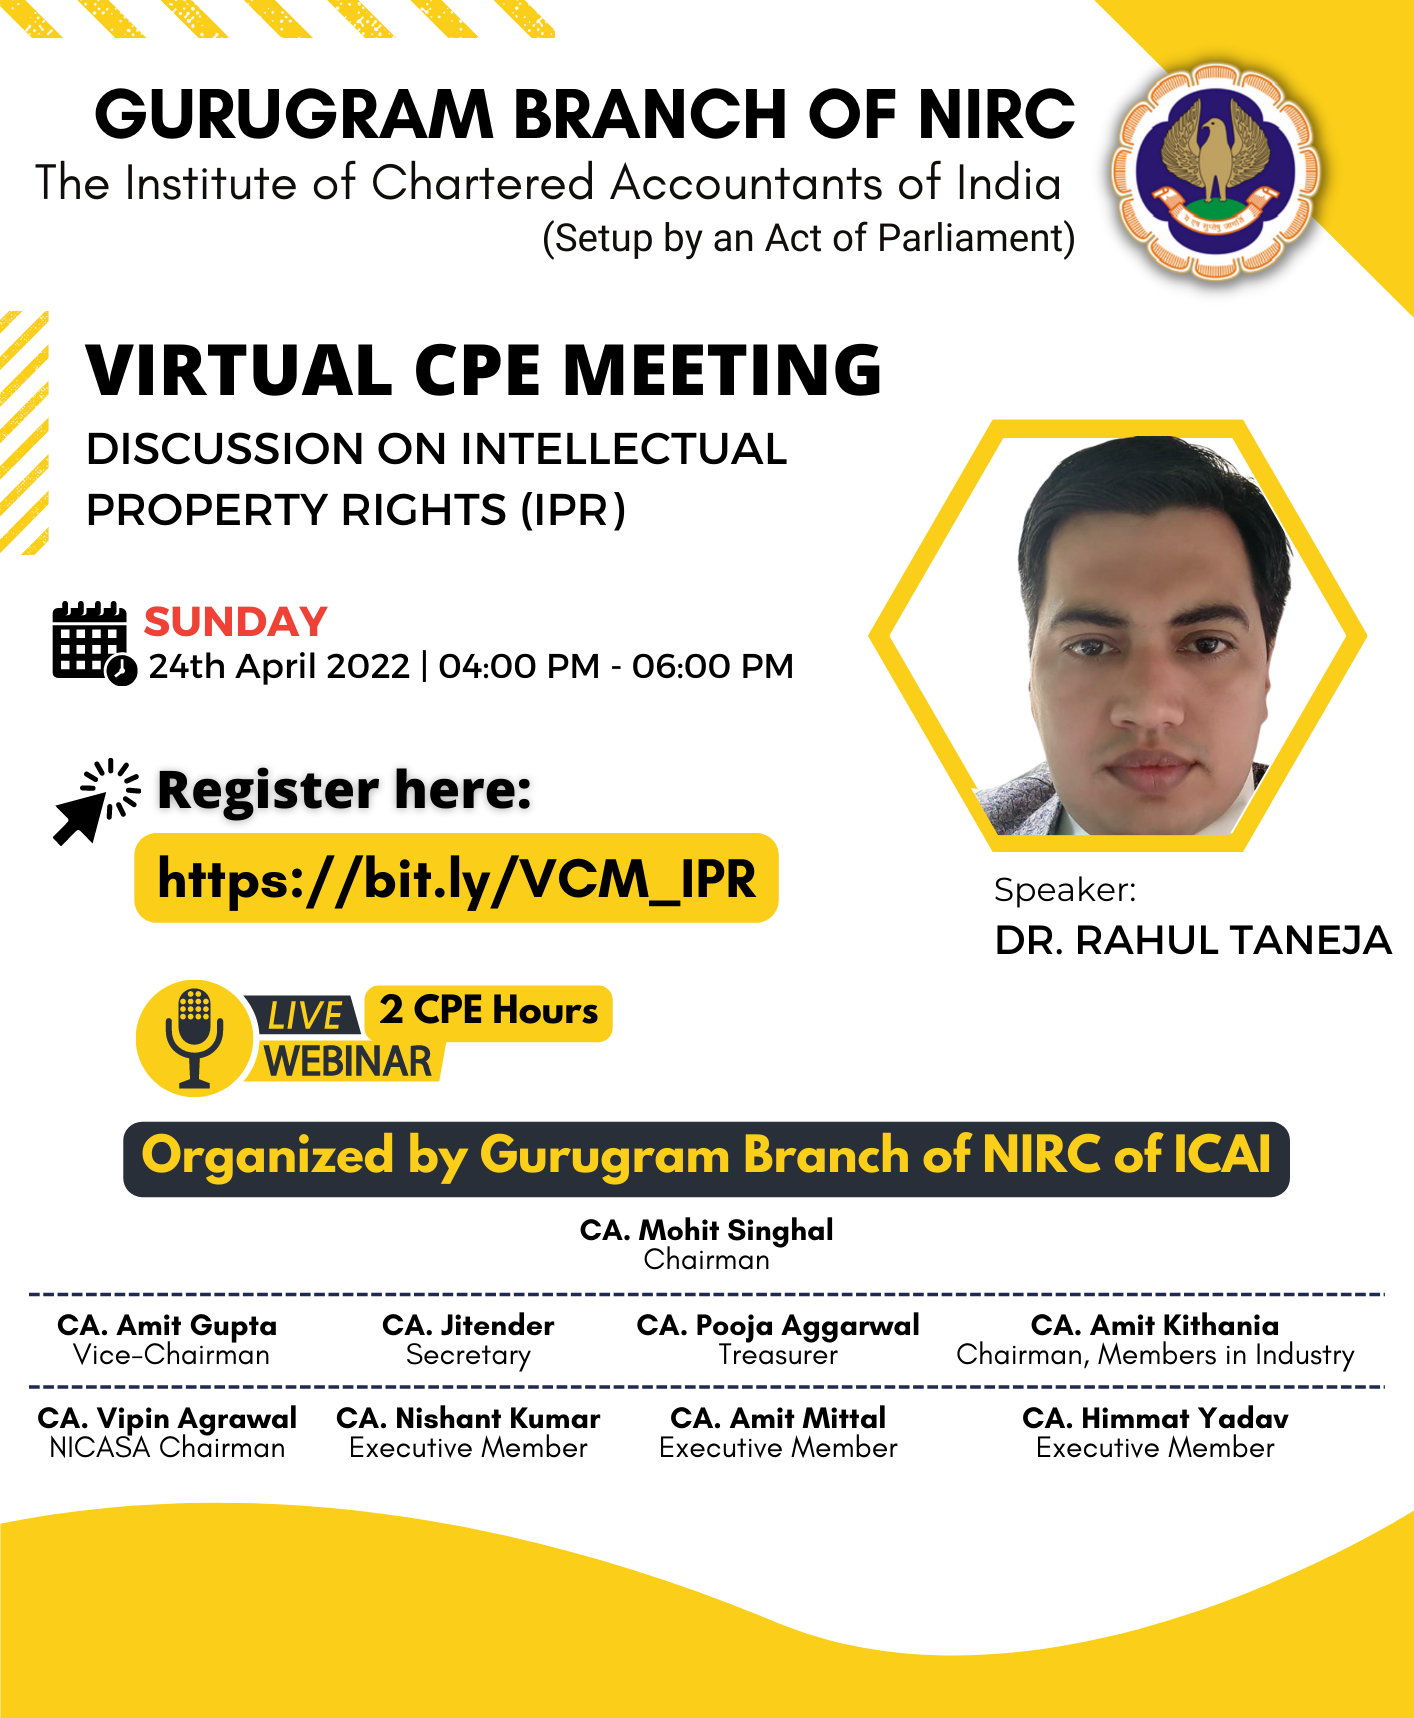 Virtual CPE Meeting on Discussion on Intellectual Property Rights (IPR)